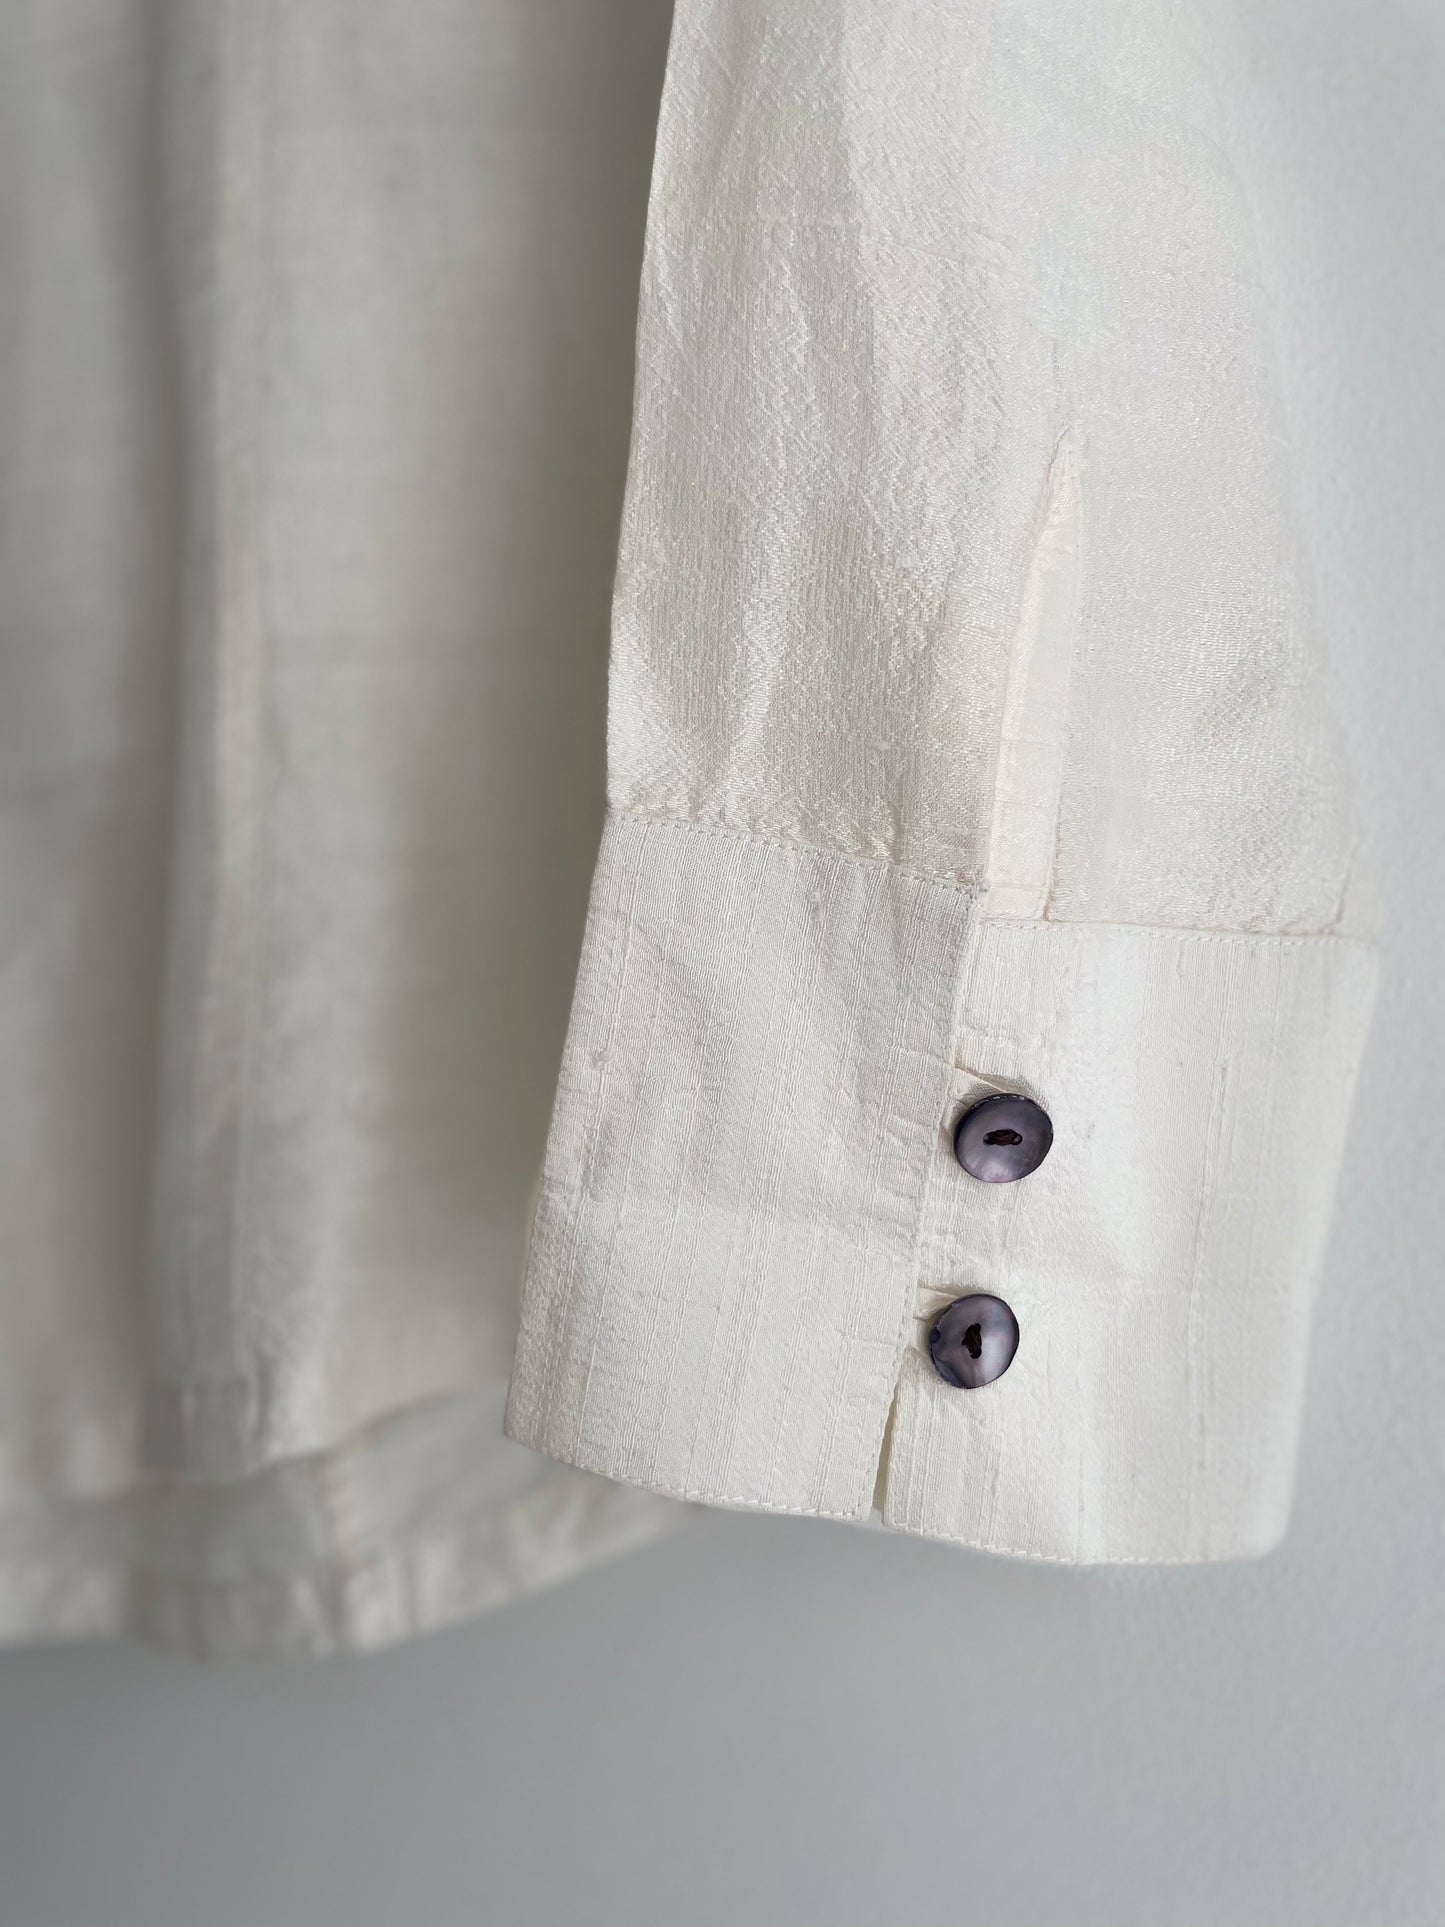 Silk Button Up | XSmall-Small